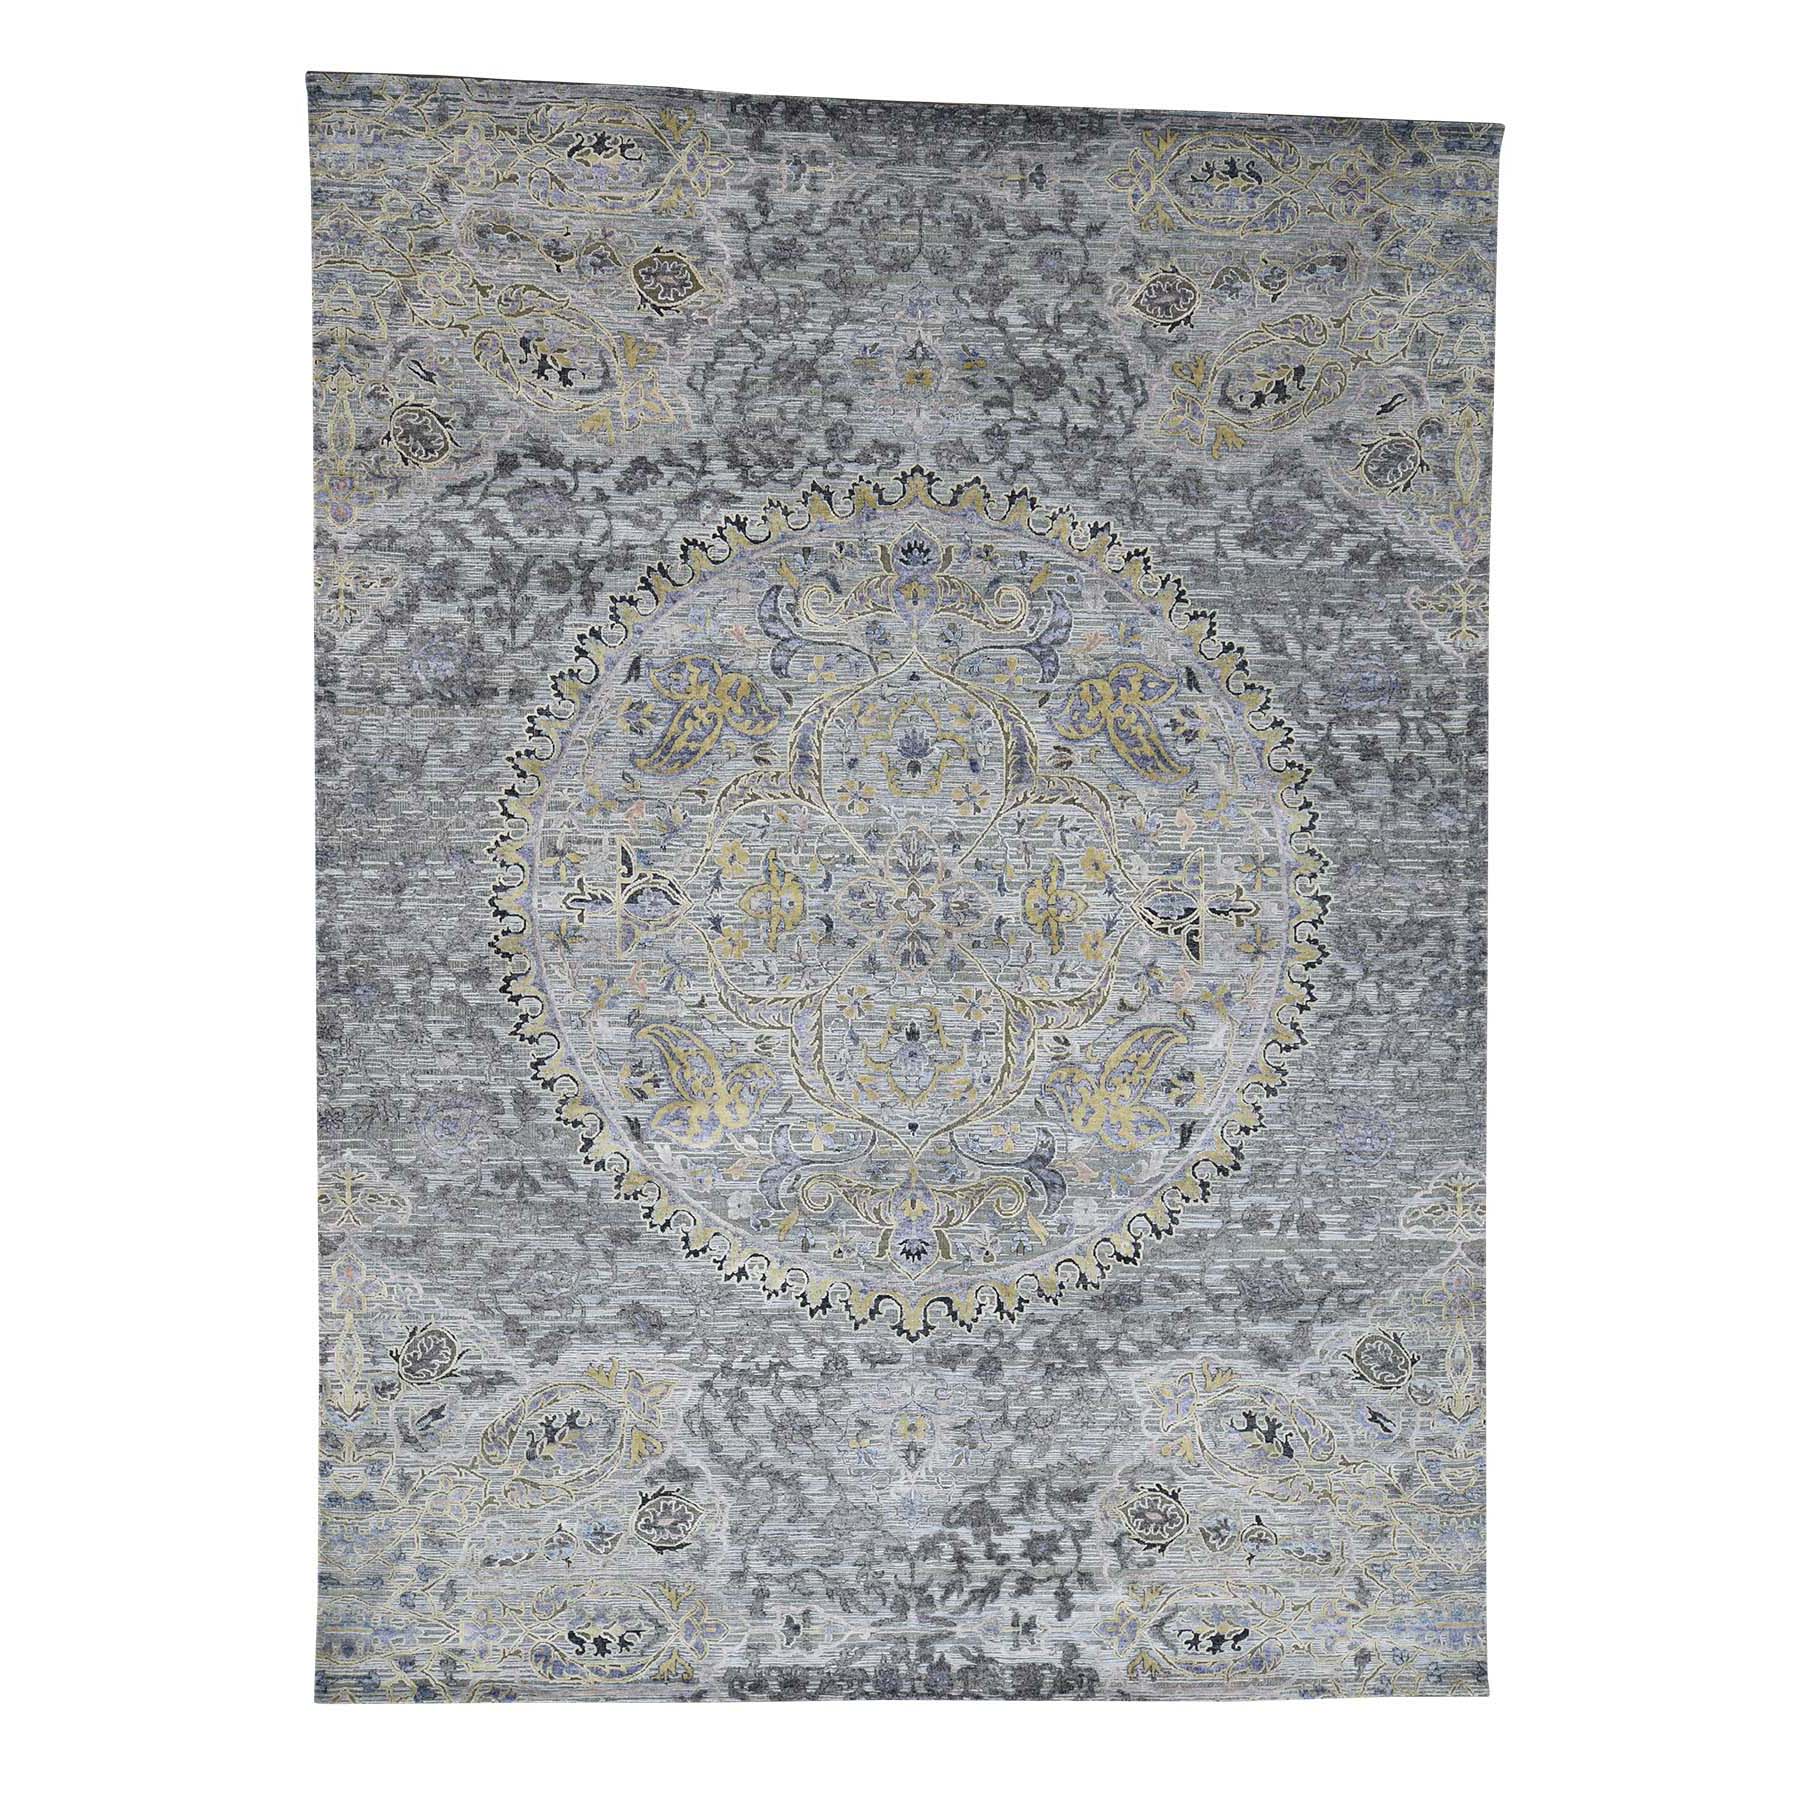 9 x12 THE MAHARAJA Silk with Textured Wool Hand-Knotted Oriental Rug 